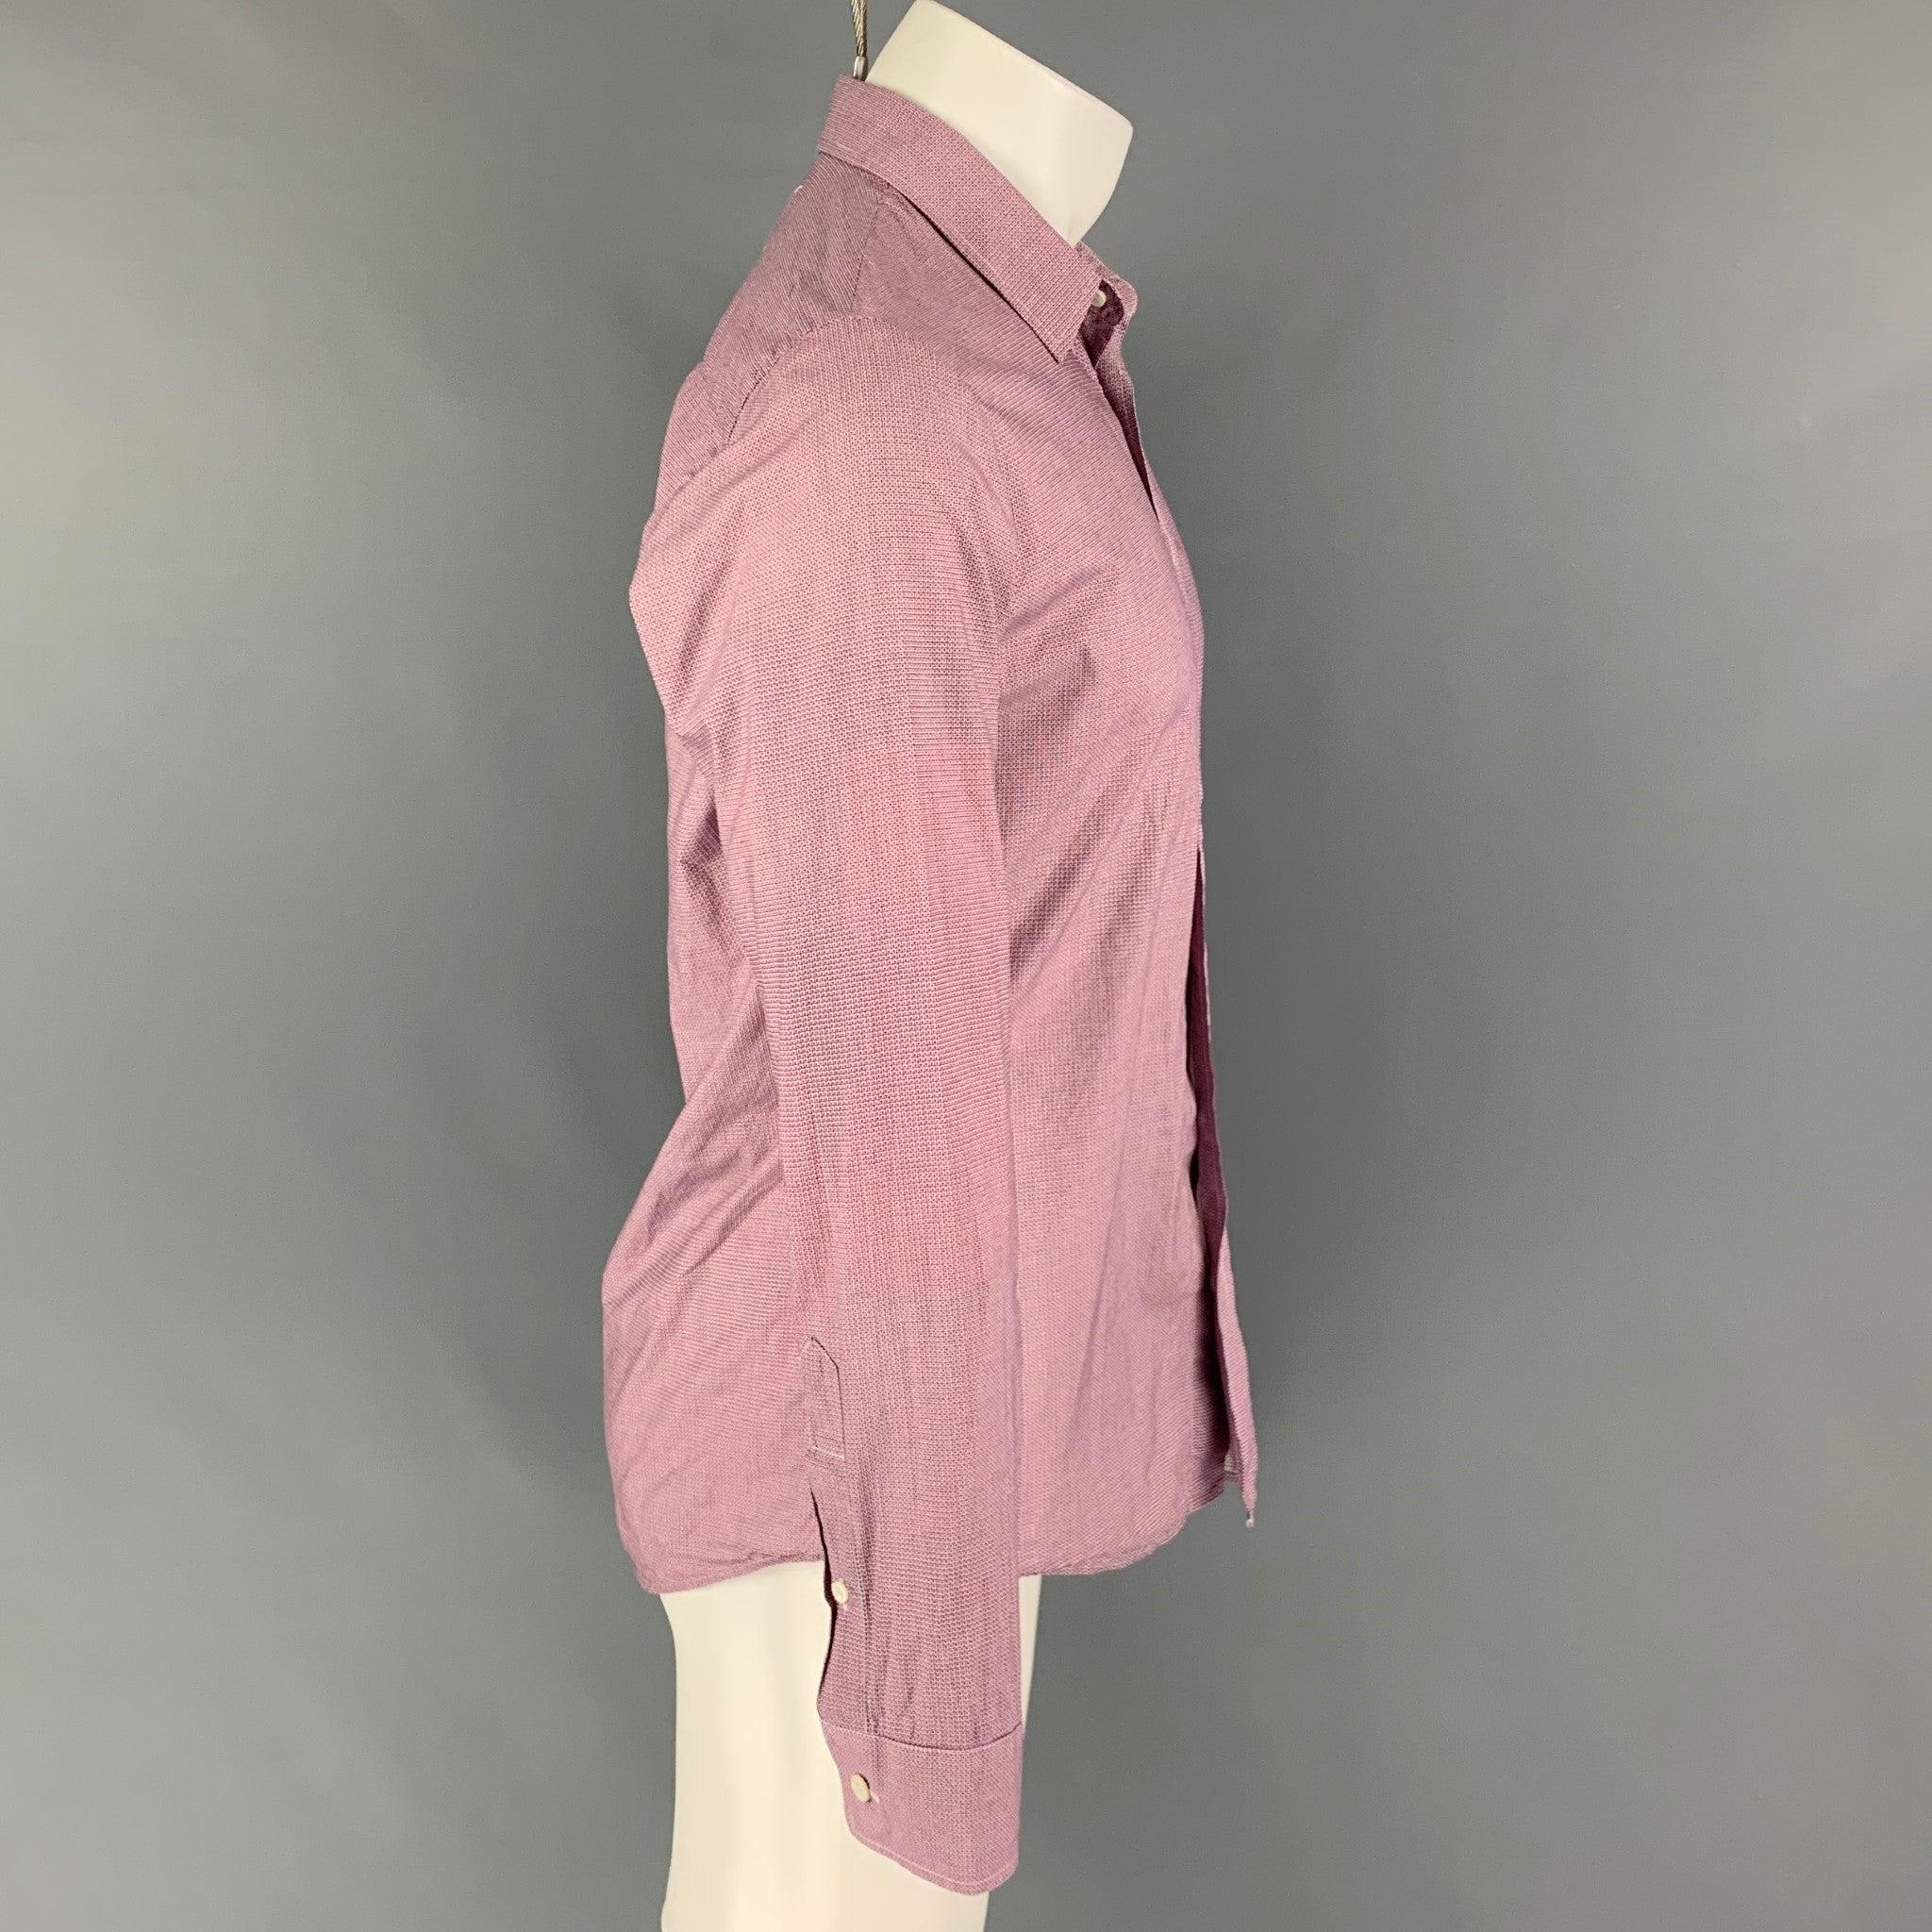 MAISON MARTIN MARGIELA long sleeve shirt comes in a red & white dot print cotton featuring a spread collar and a button up closure. Made in Romania.Very Good
 Pre-Owned Condition. 
 

 Marked:  46 
 

 Measurements: 
  
 Shoulder: 16.5 inches Chest: